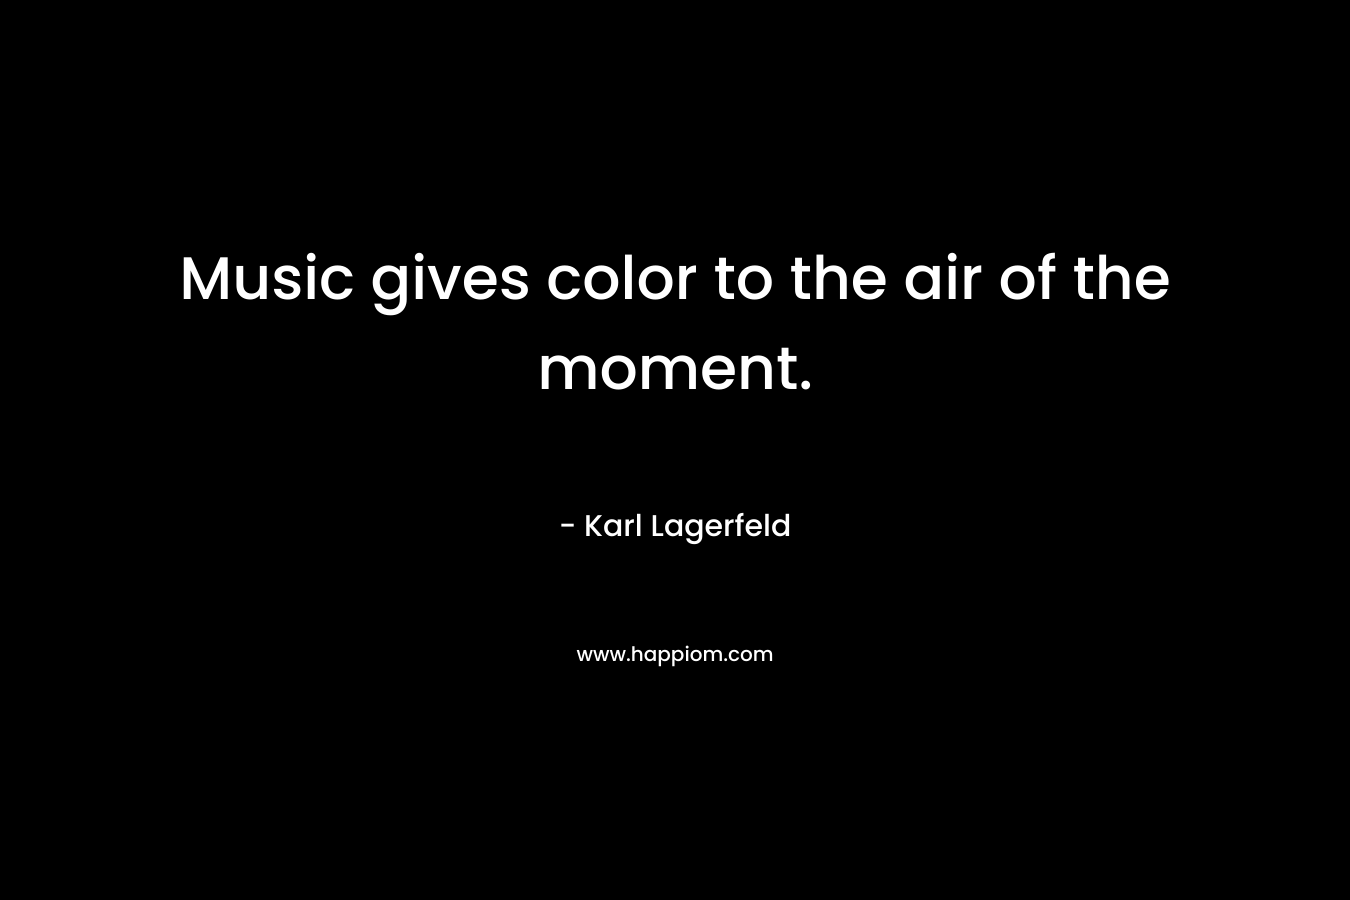 Music gives color to the air of the moment. – Karl Lagerfeld